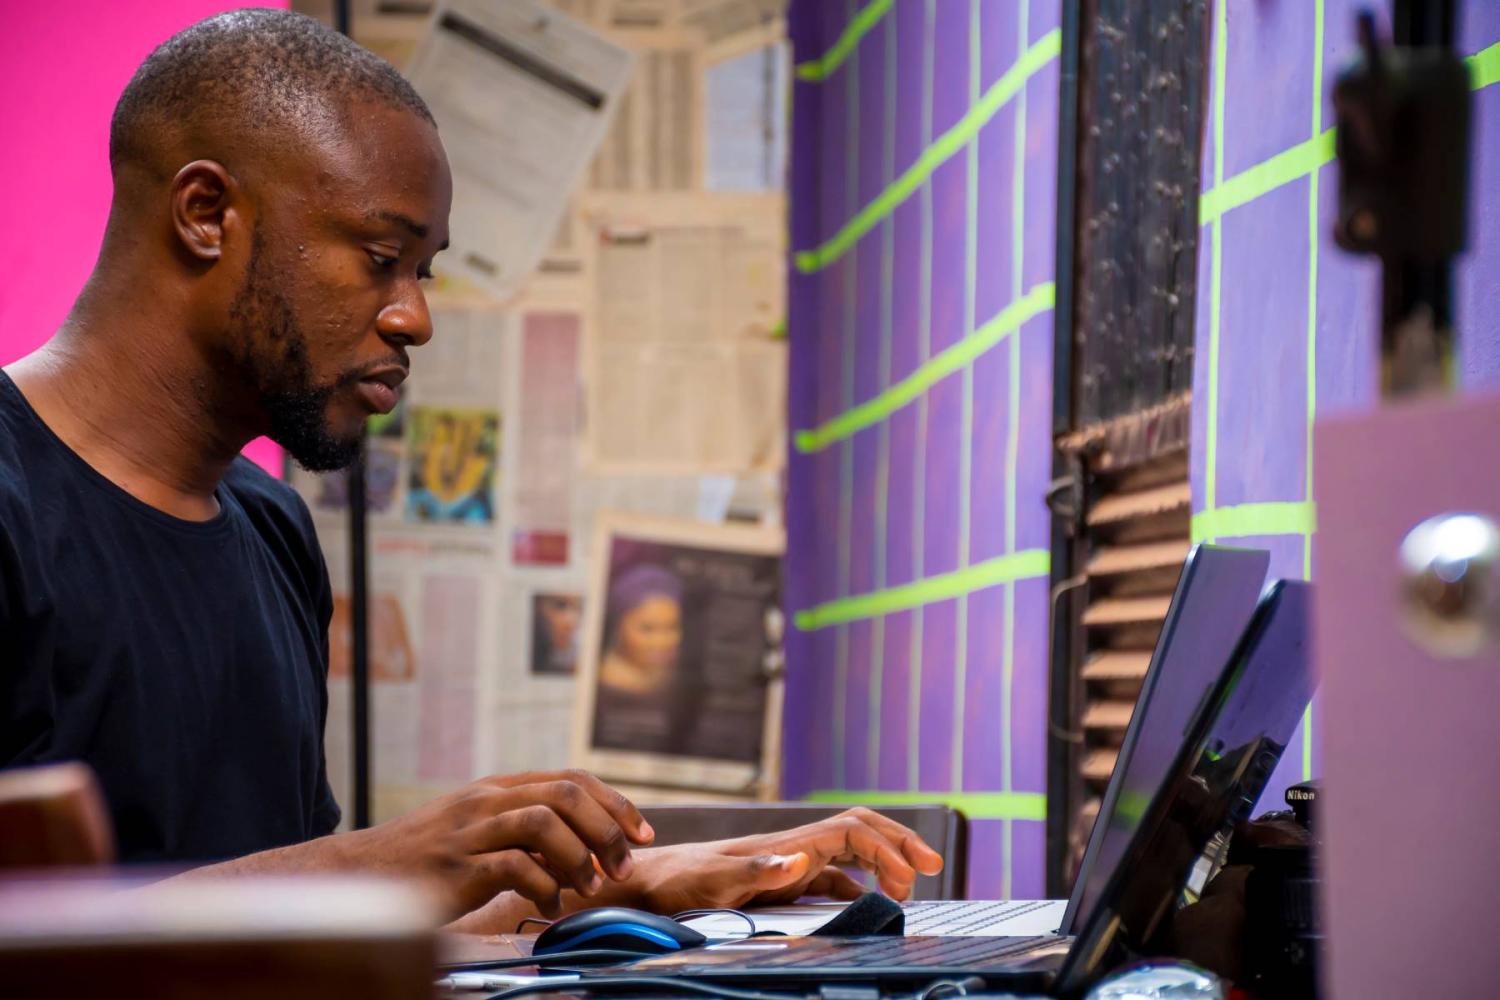 A young African man works on a laptop in his office. (Photo credit: courage007 / Shutterstock)